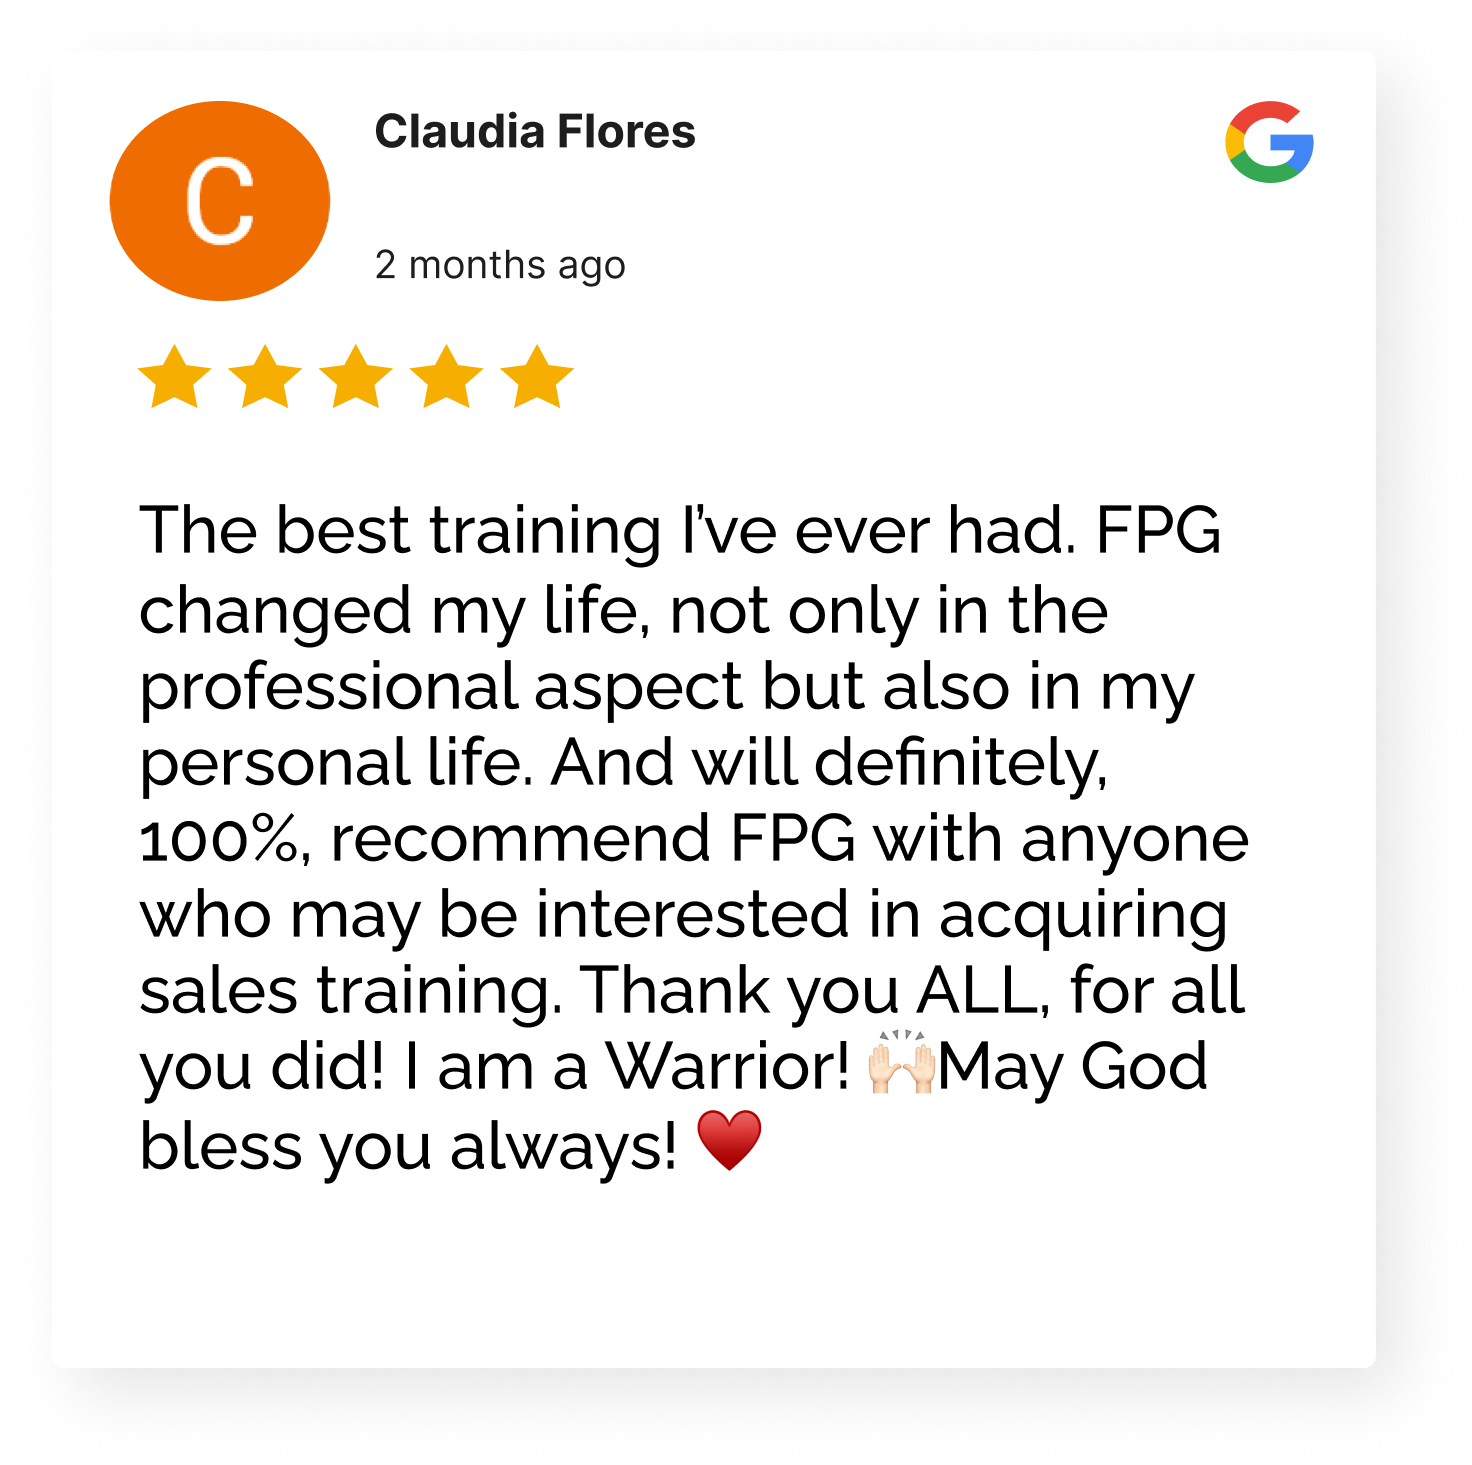 FPG sales training customer review